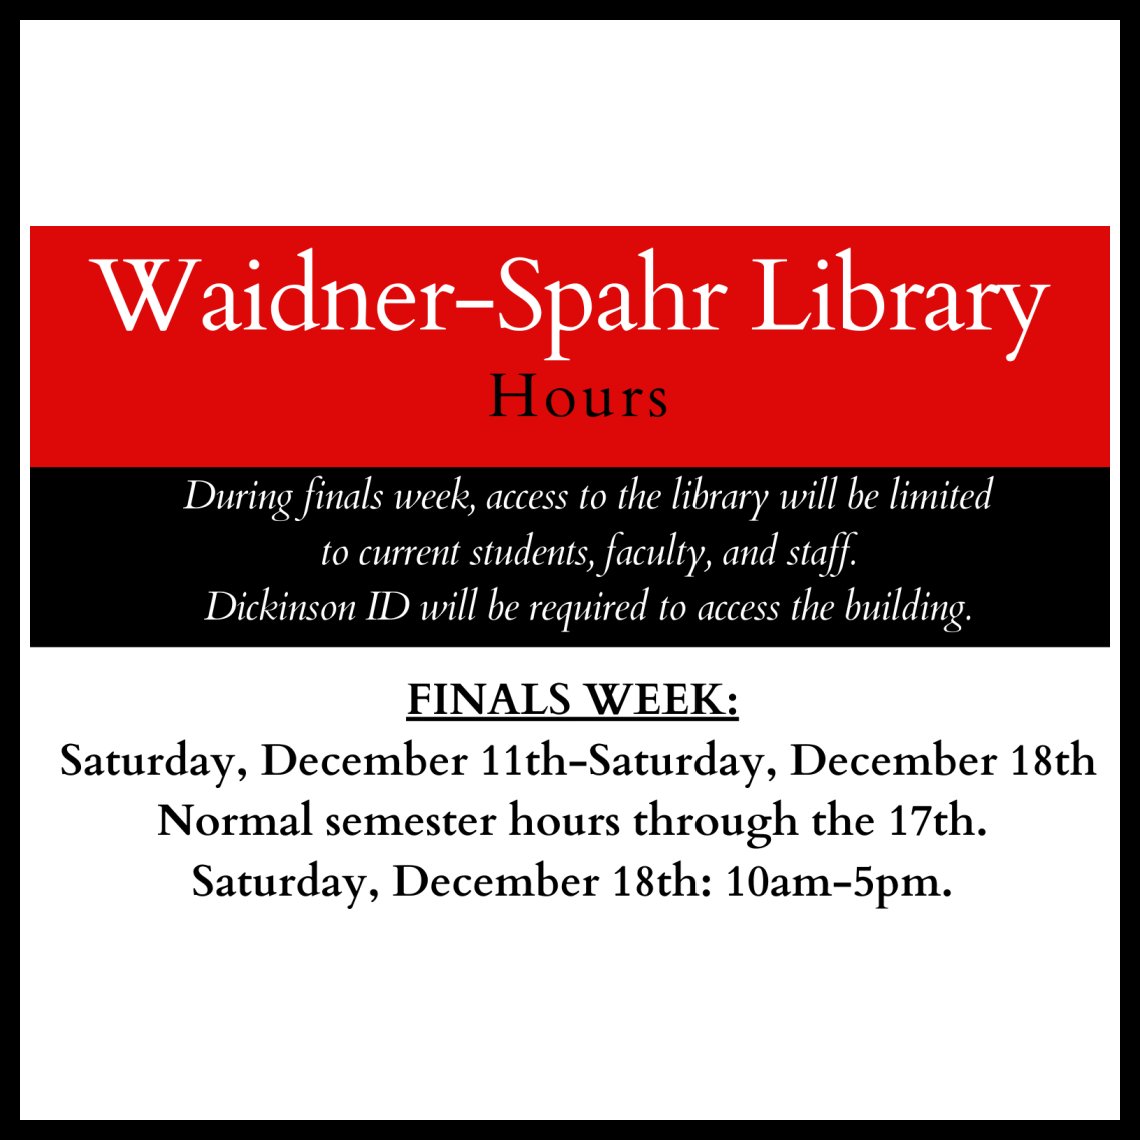 WaidnerSpahr Library (@DsonLibrary) on Twitter photo 2021-12-07 15:48:16